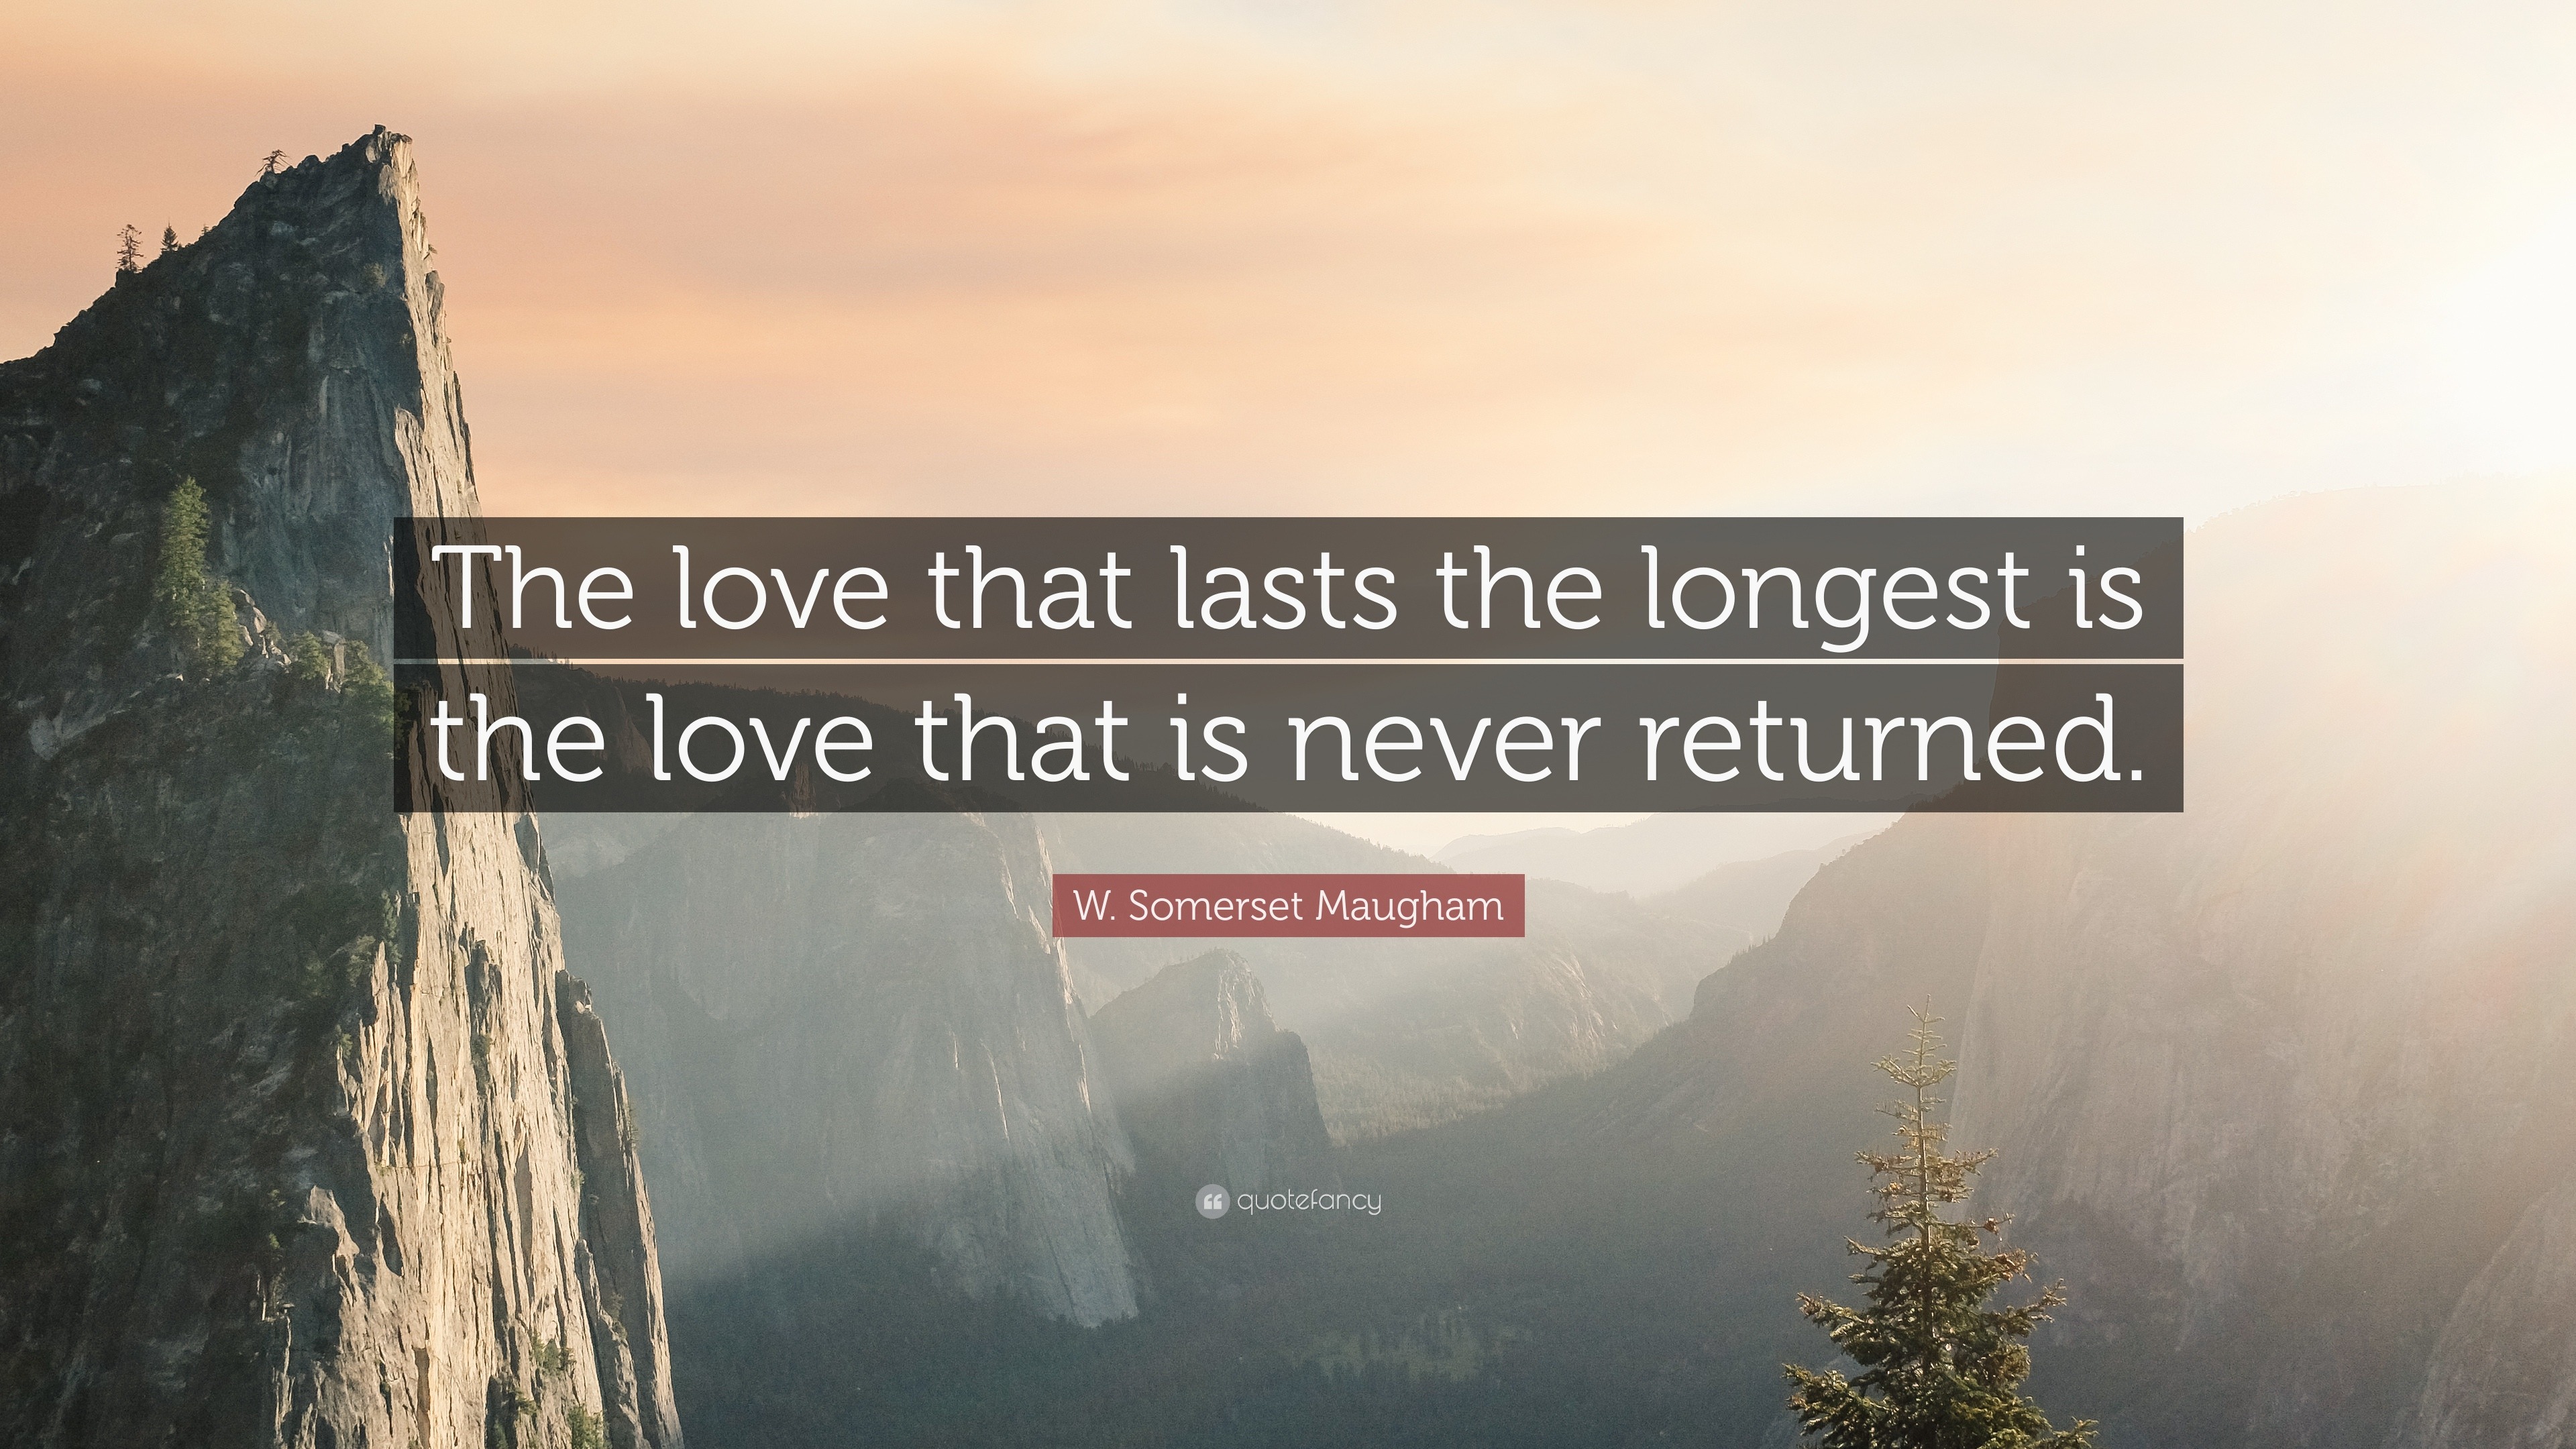 W Somerset Maugham Quote “The love that lasts the longest is the love